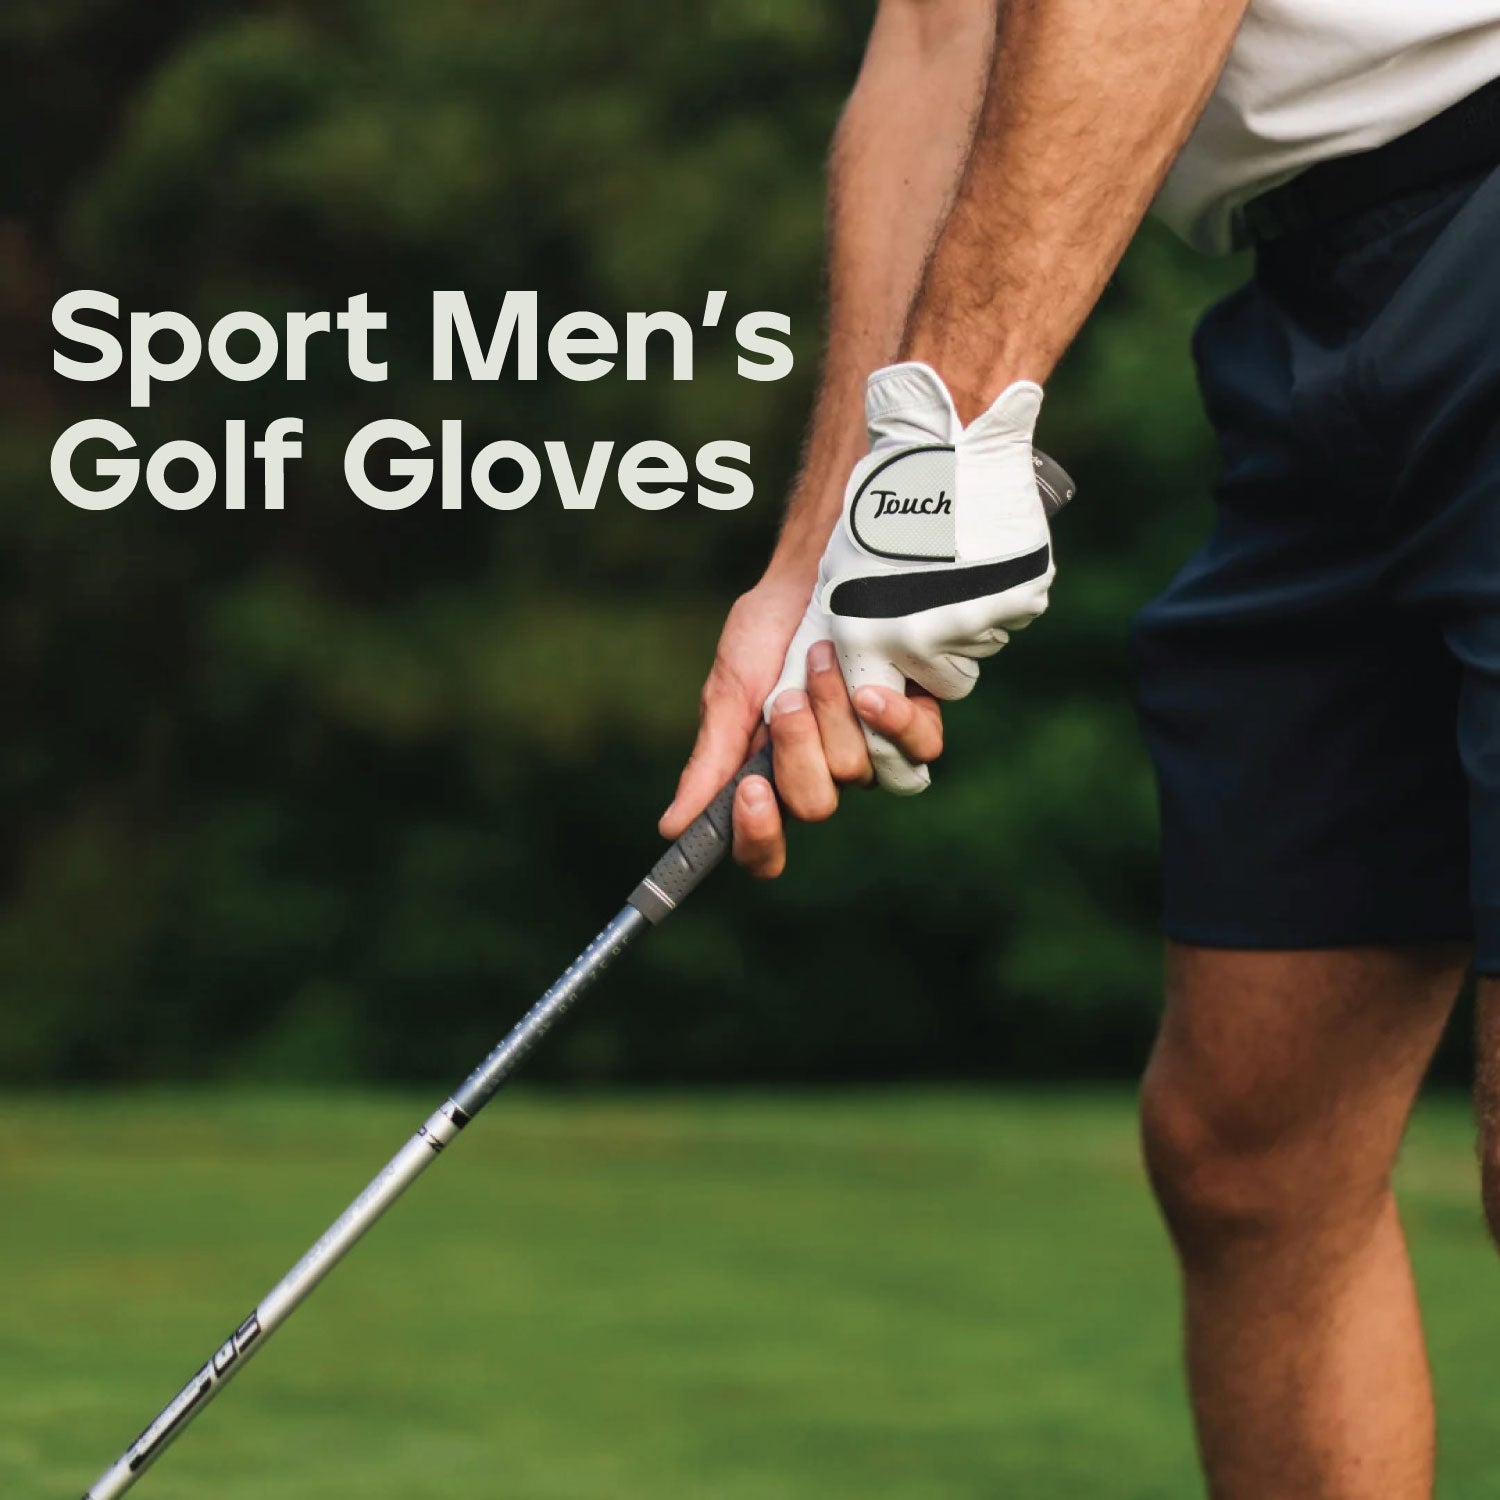 Golf Gloves Left Hand - Mens Golf Gloves Left Hand Right Leather Cabretta With Ball Marker Value Pack, Golf Gloves Men All Weather Soft Comfortable